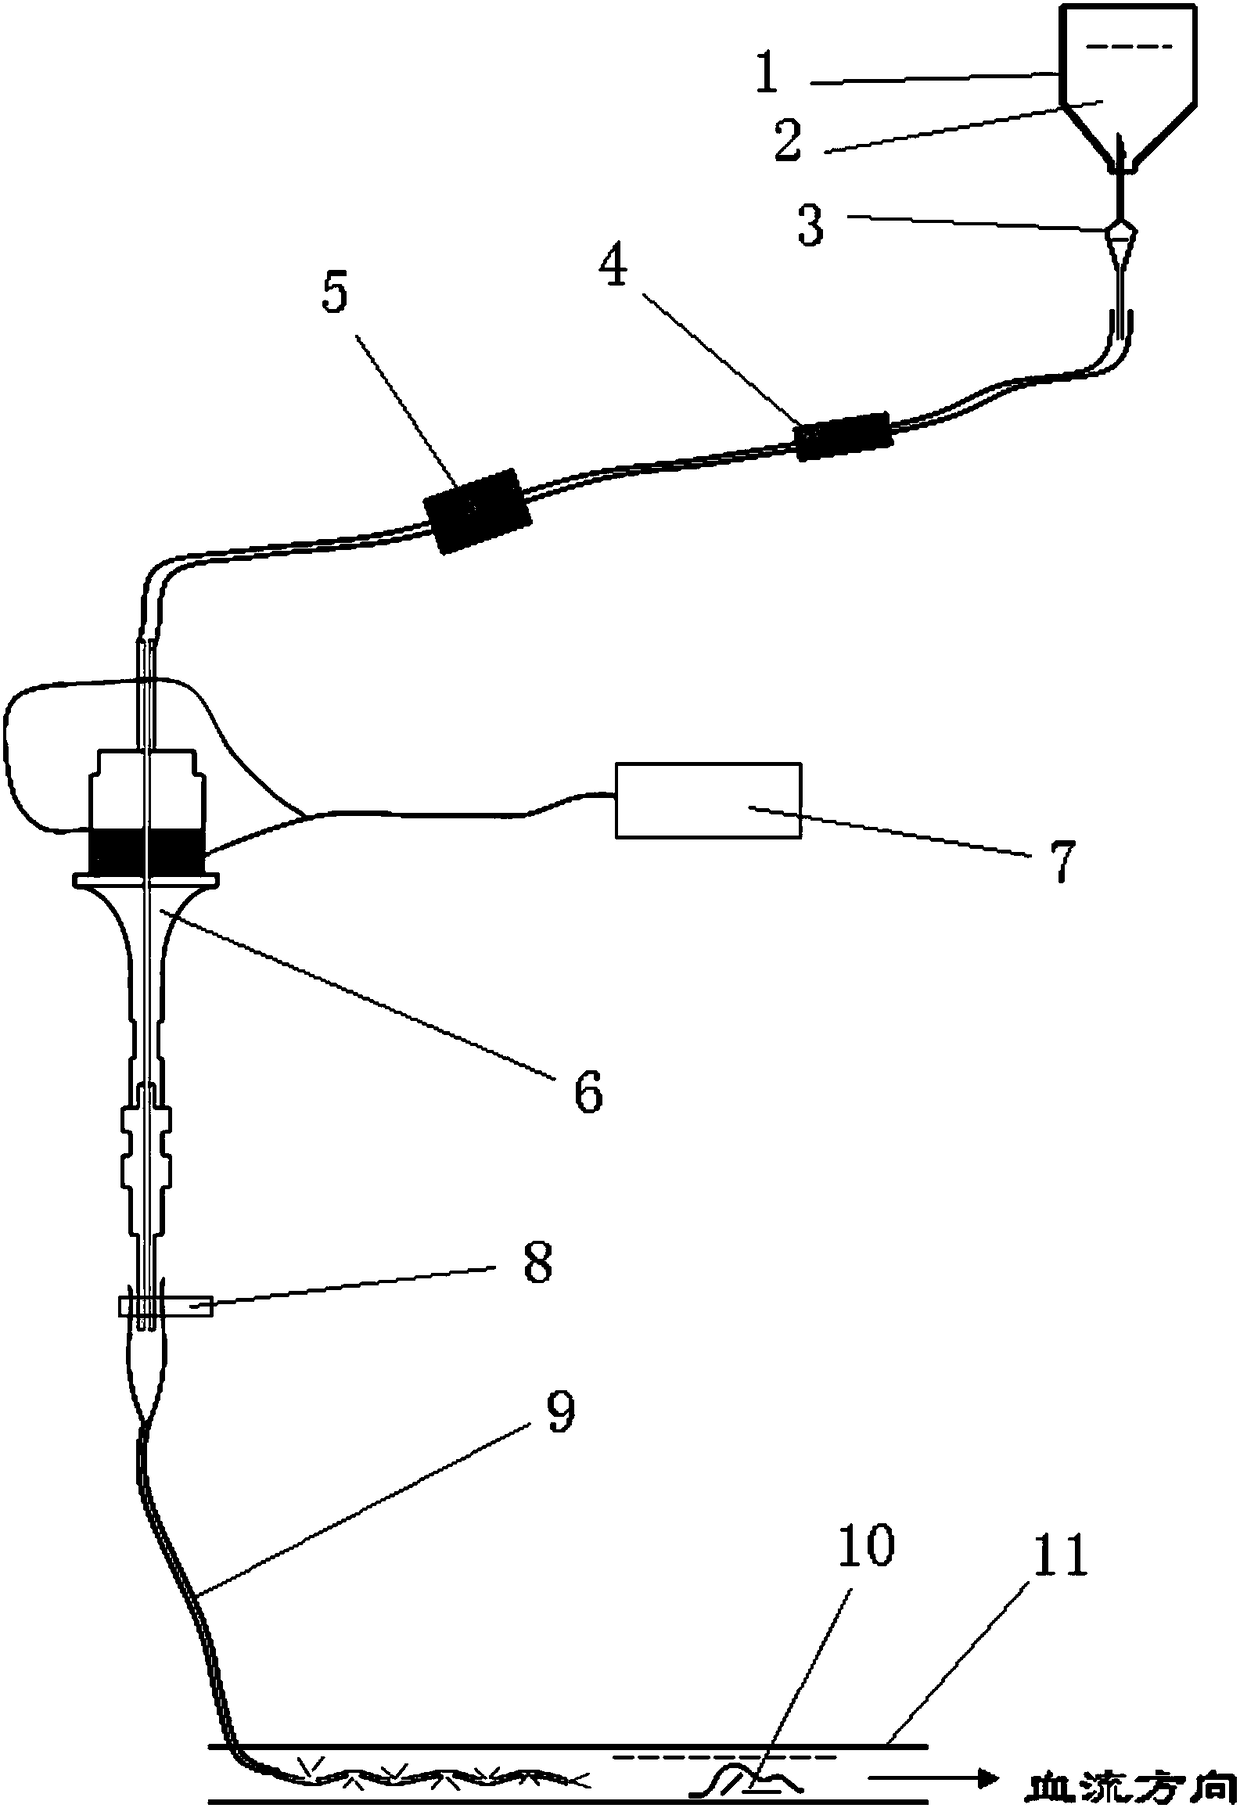 Built-in medical ultrasonic thrombolytic therapy apparatus